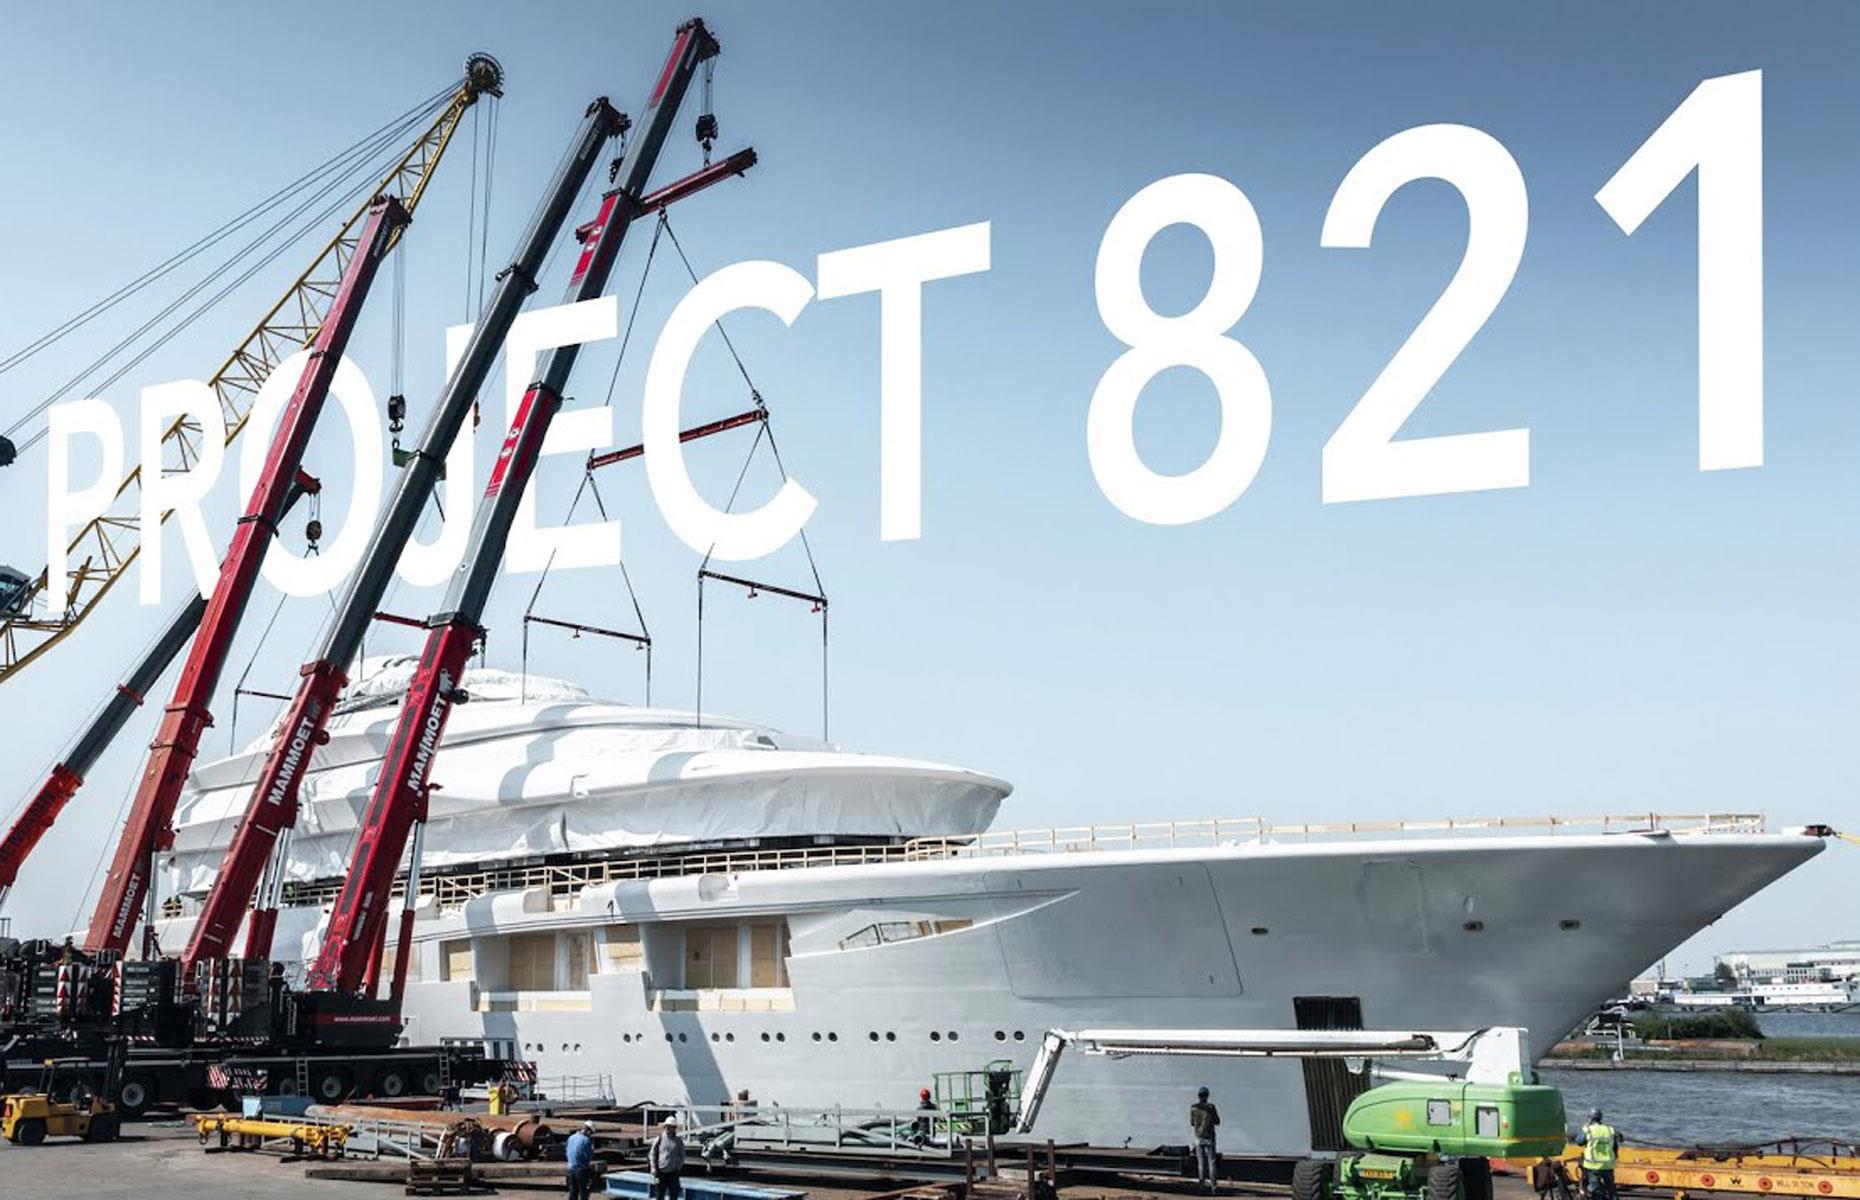 <p>The biggest Feadship superyacht launching this year – not to mention the largest the Dutch company has ever built – is <em>Project 821</em>, which spans 390 feet.</p>  <p>Feadship is being as secretive about this superyacht as it is with <em>Project 1012</em>, with very few details known about it. </p>